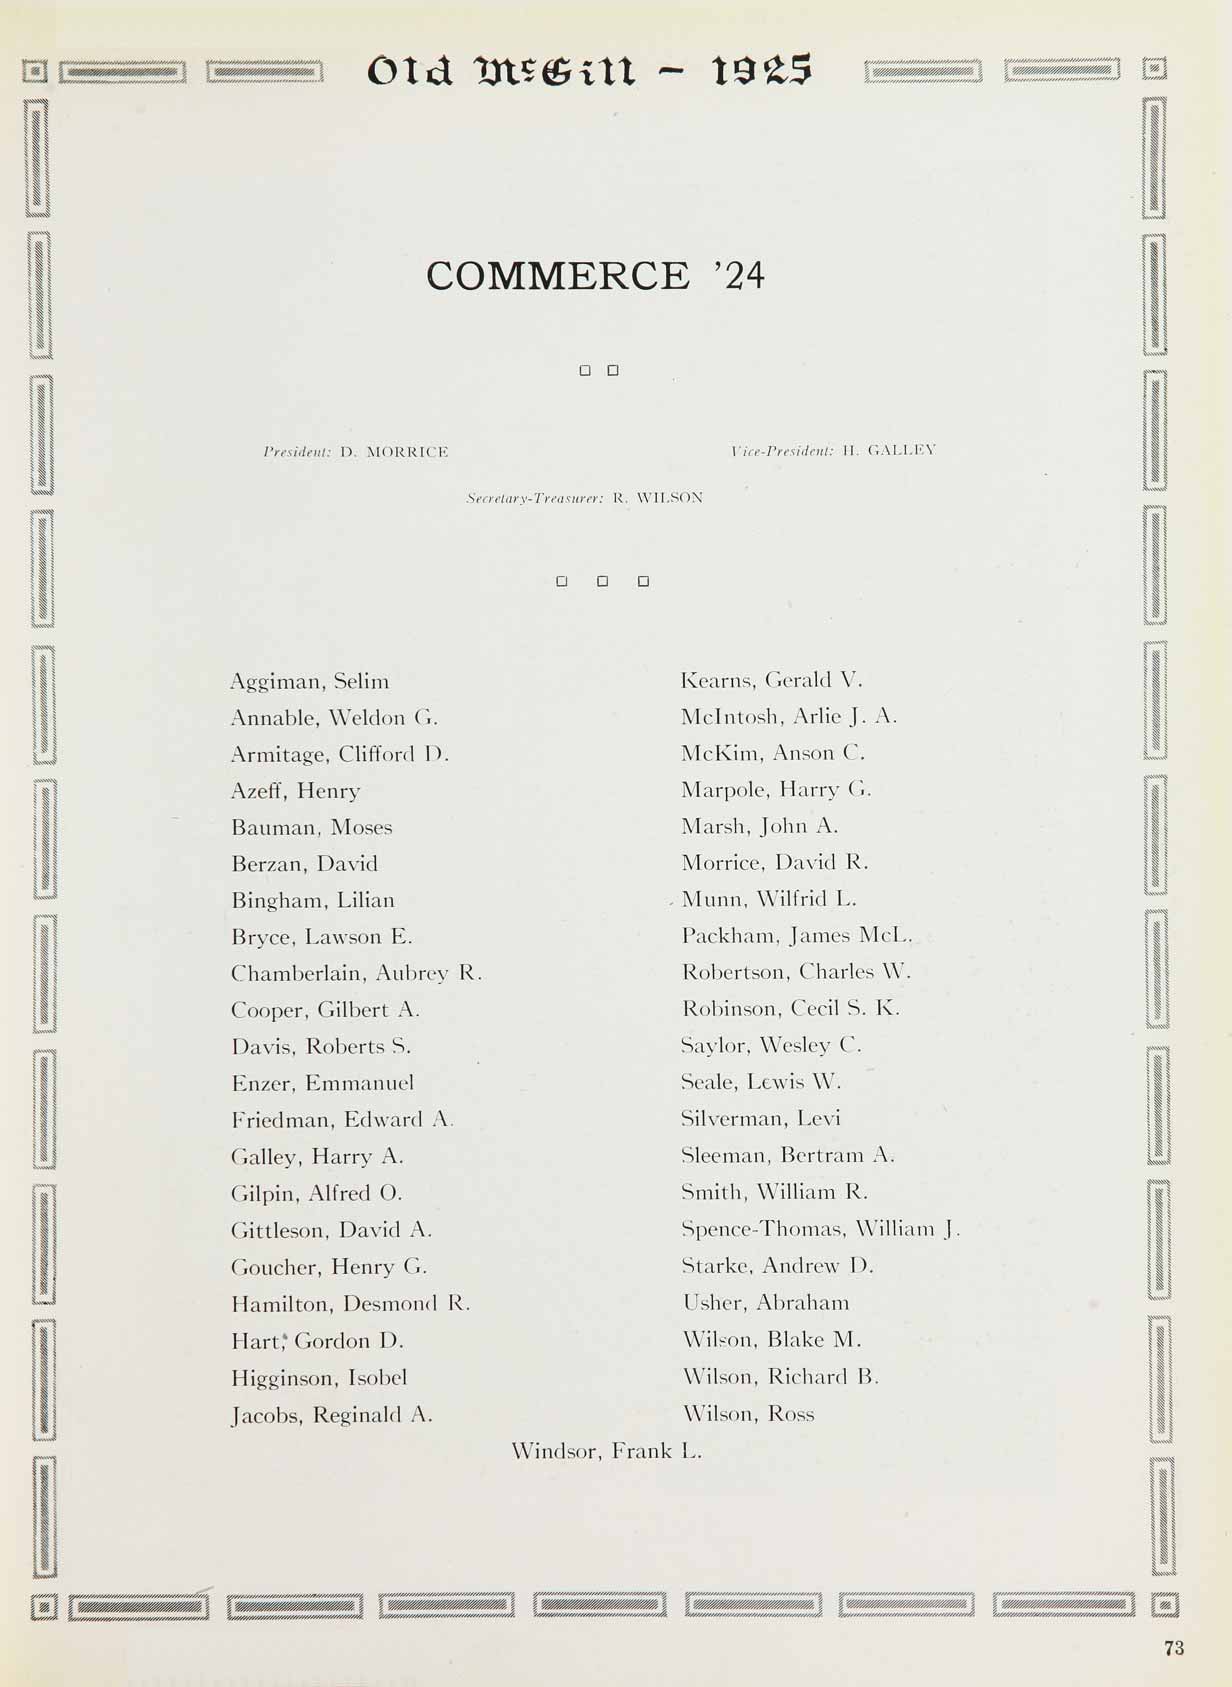 McGill Yearbook: 1925